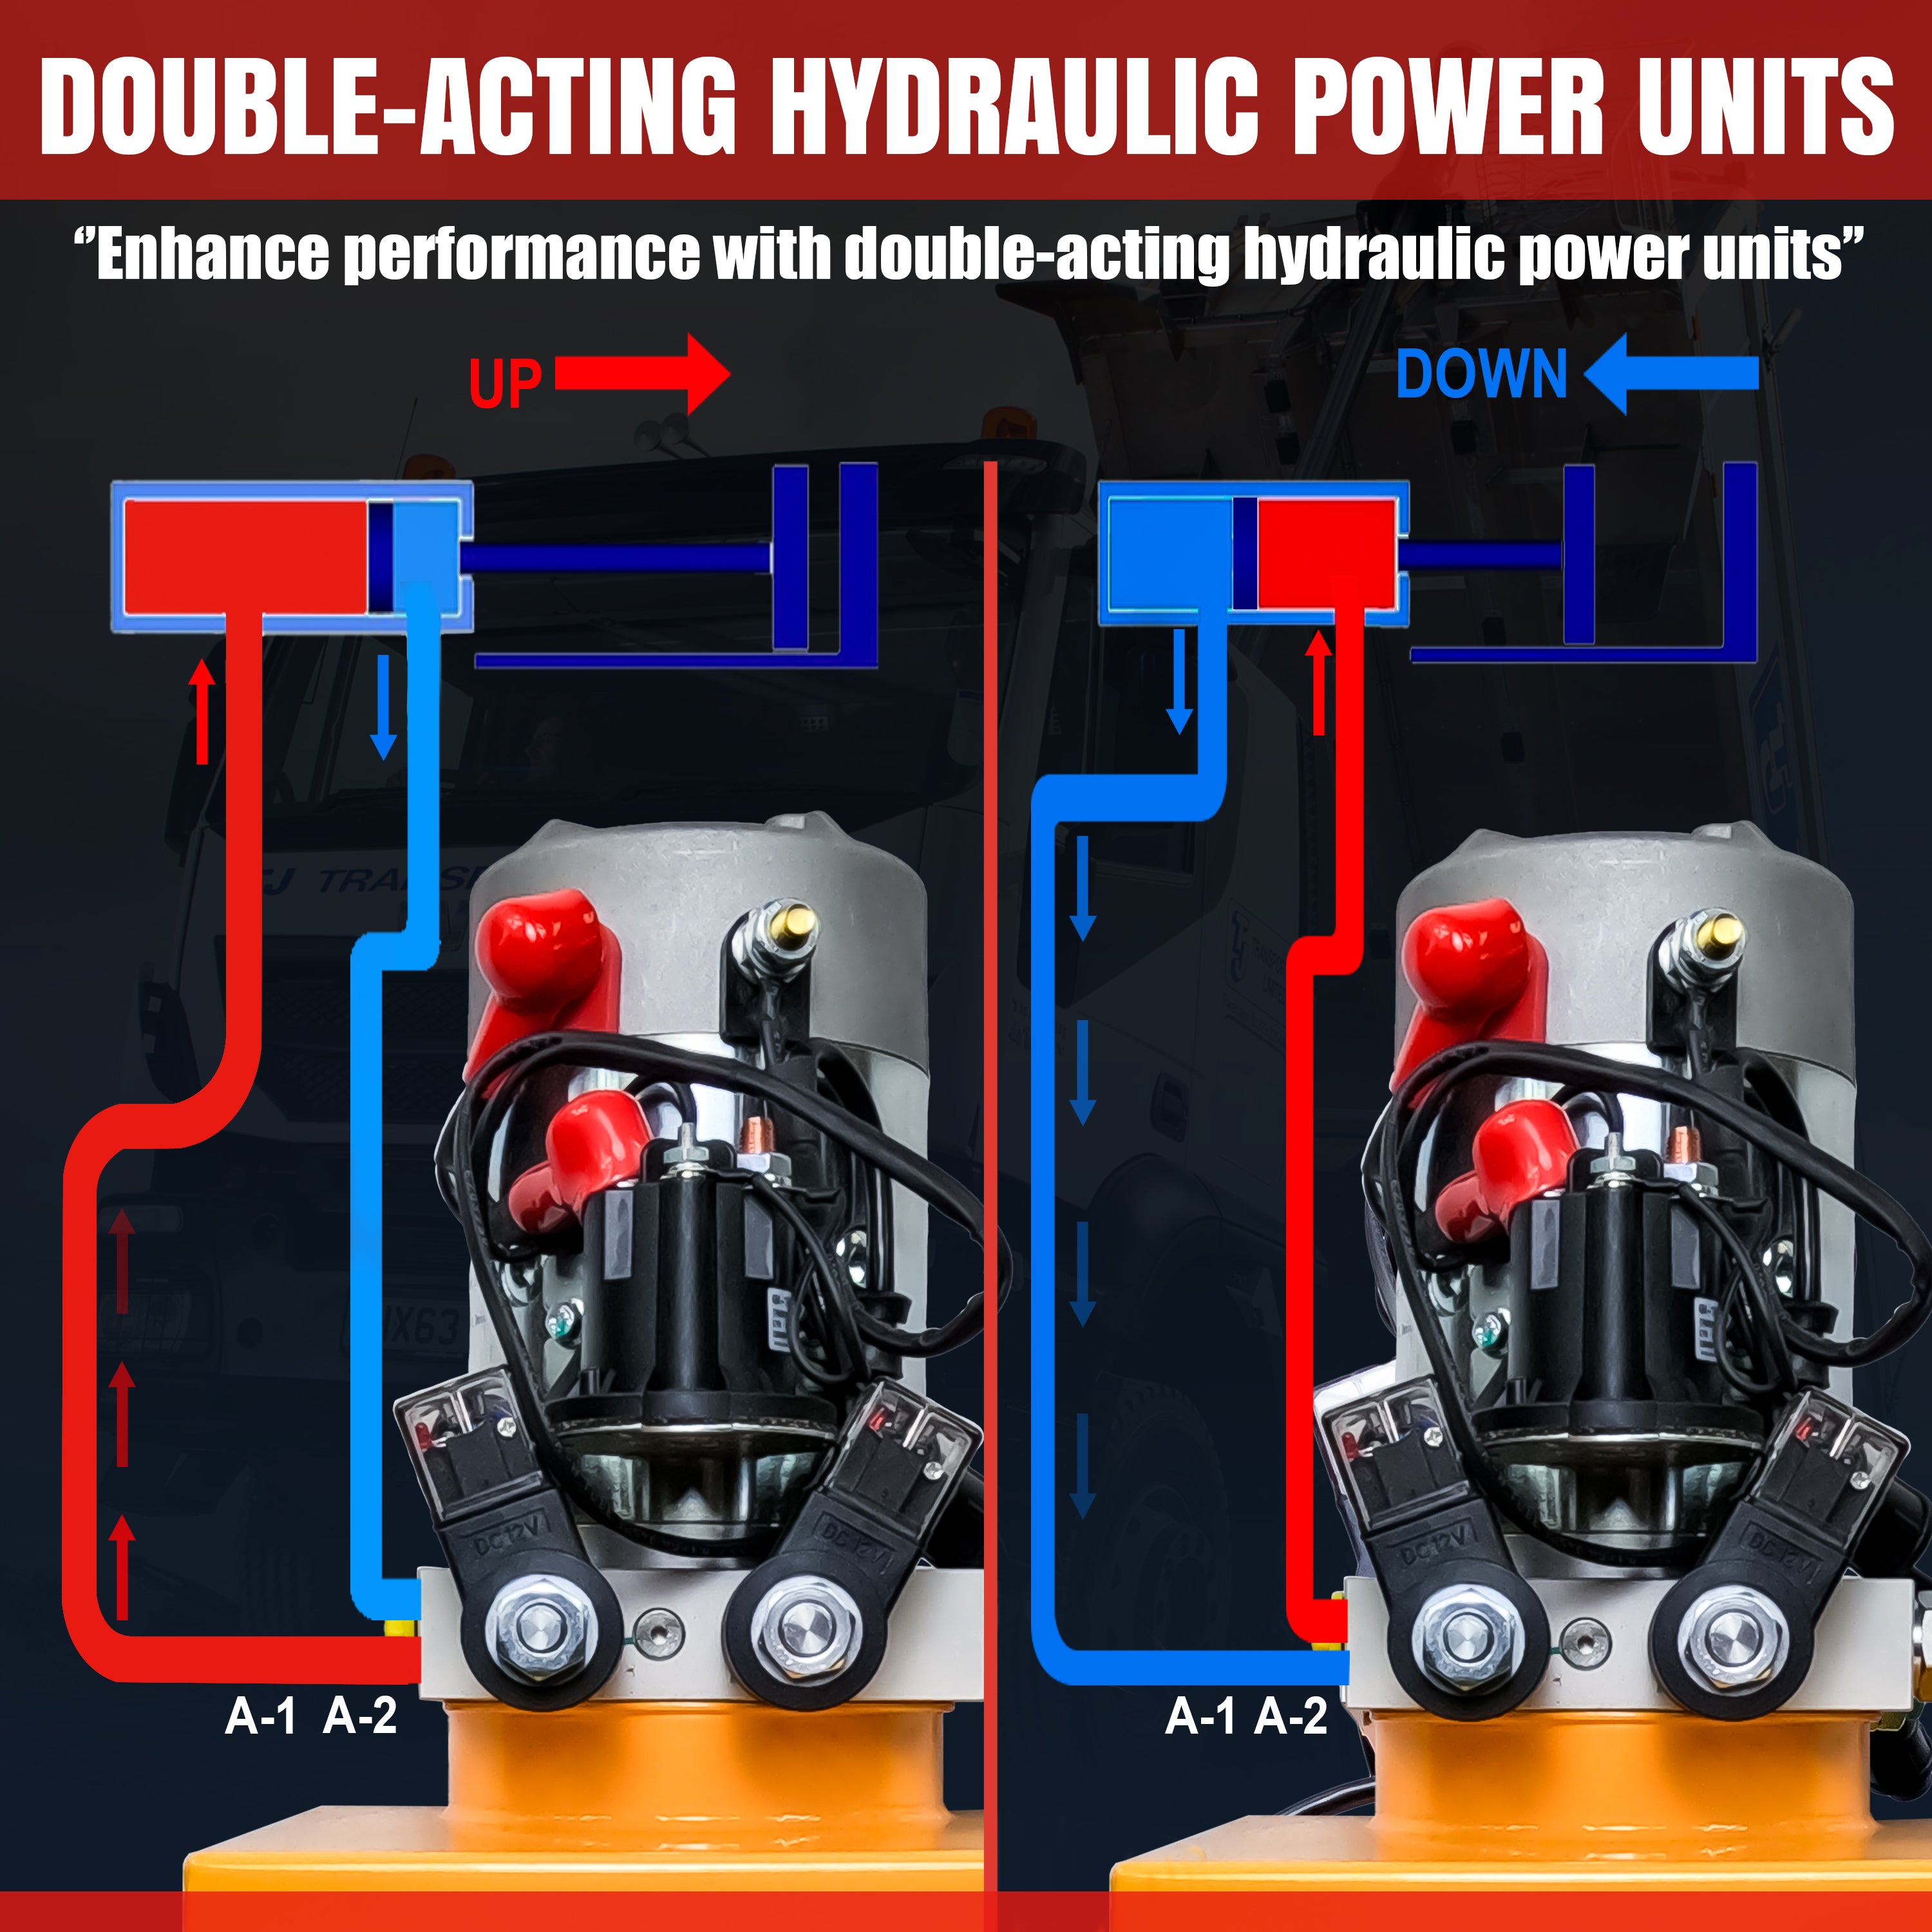 Primary Mover Double Acting 12VDC Hydraulic Power Unit with Steel Reservoirs for hydraulic dump bed systems. Dual-acting precision, tailored design, and quality craftsmanship for efficient and reliable performance.